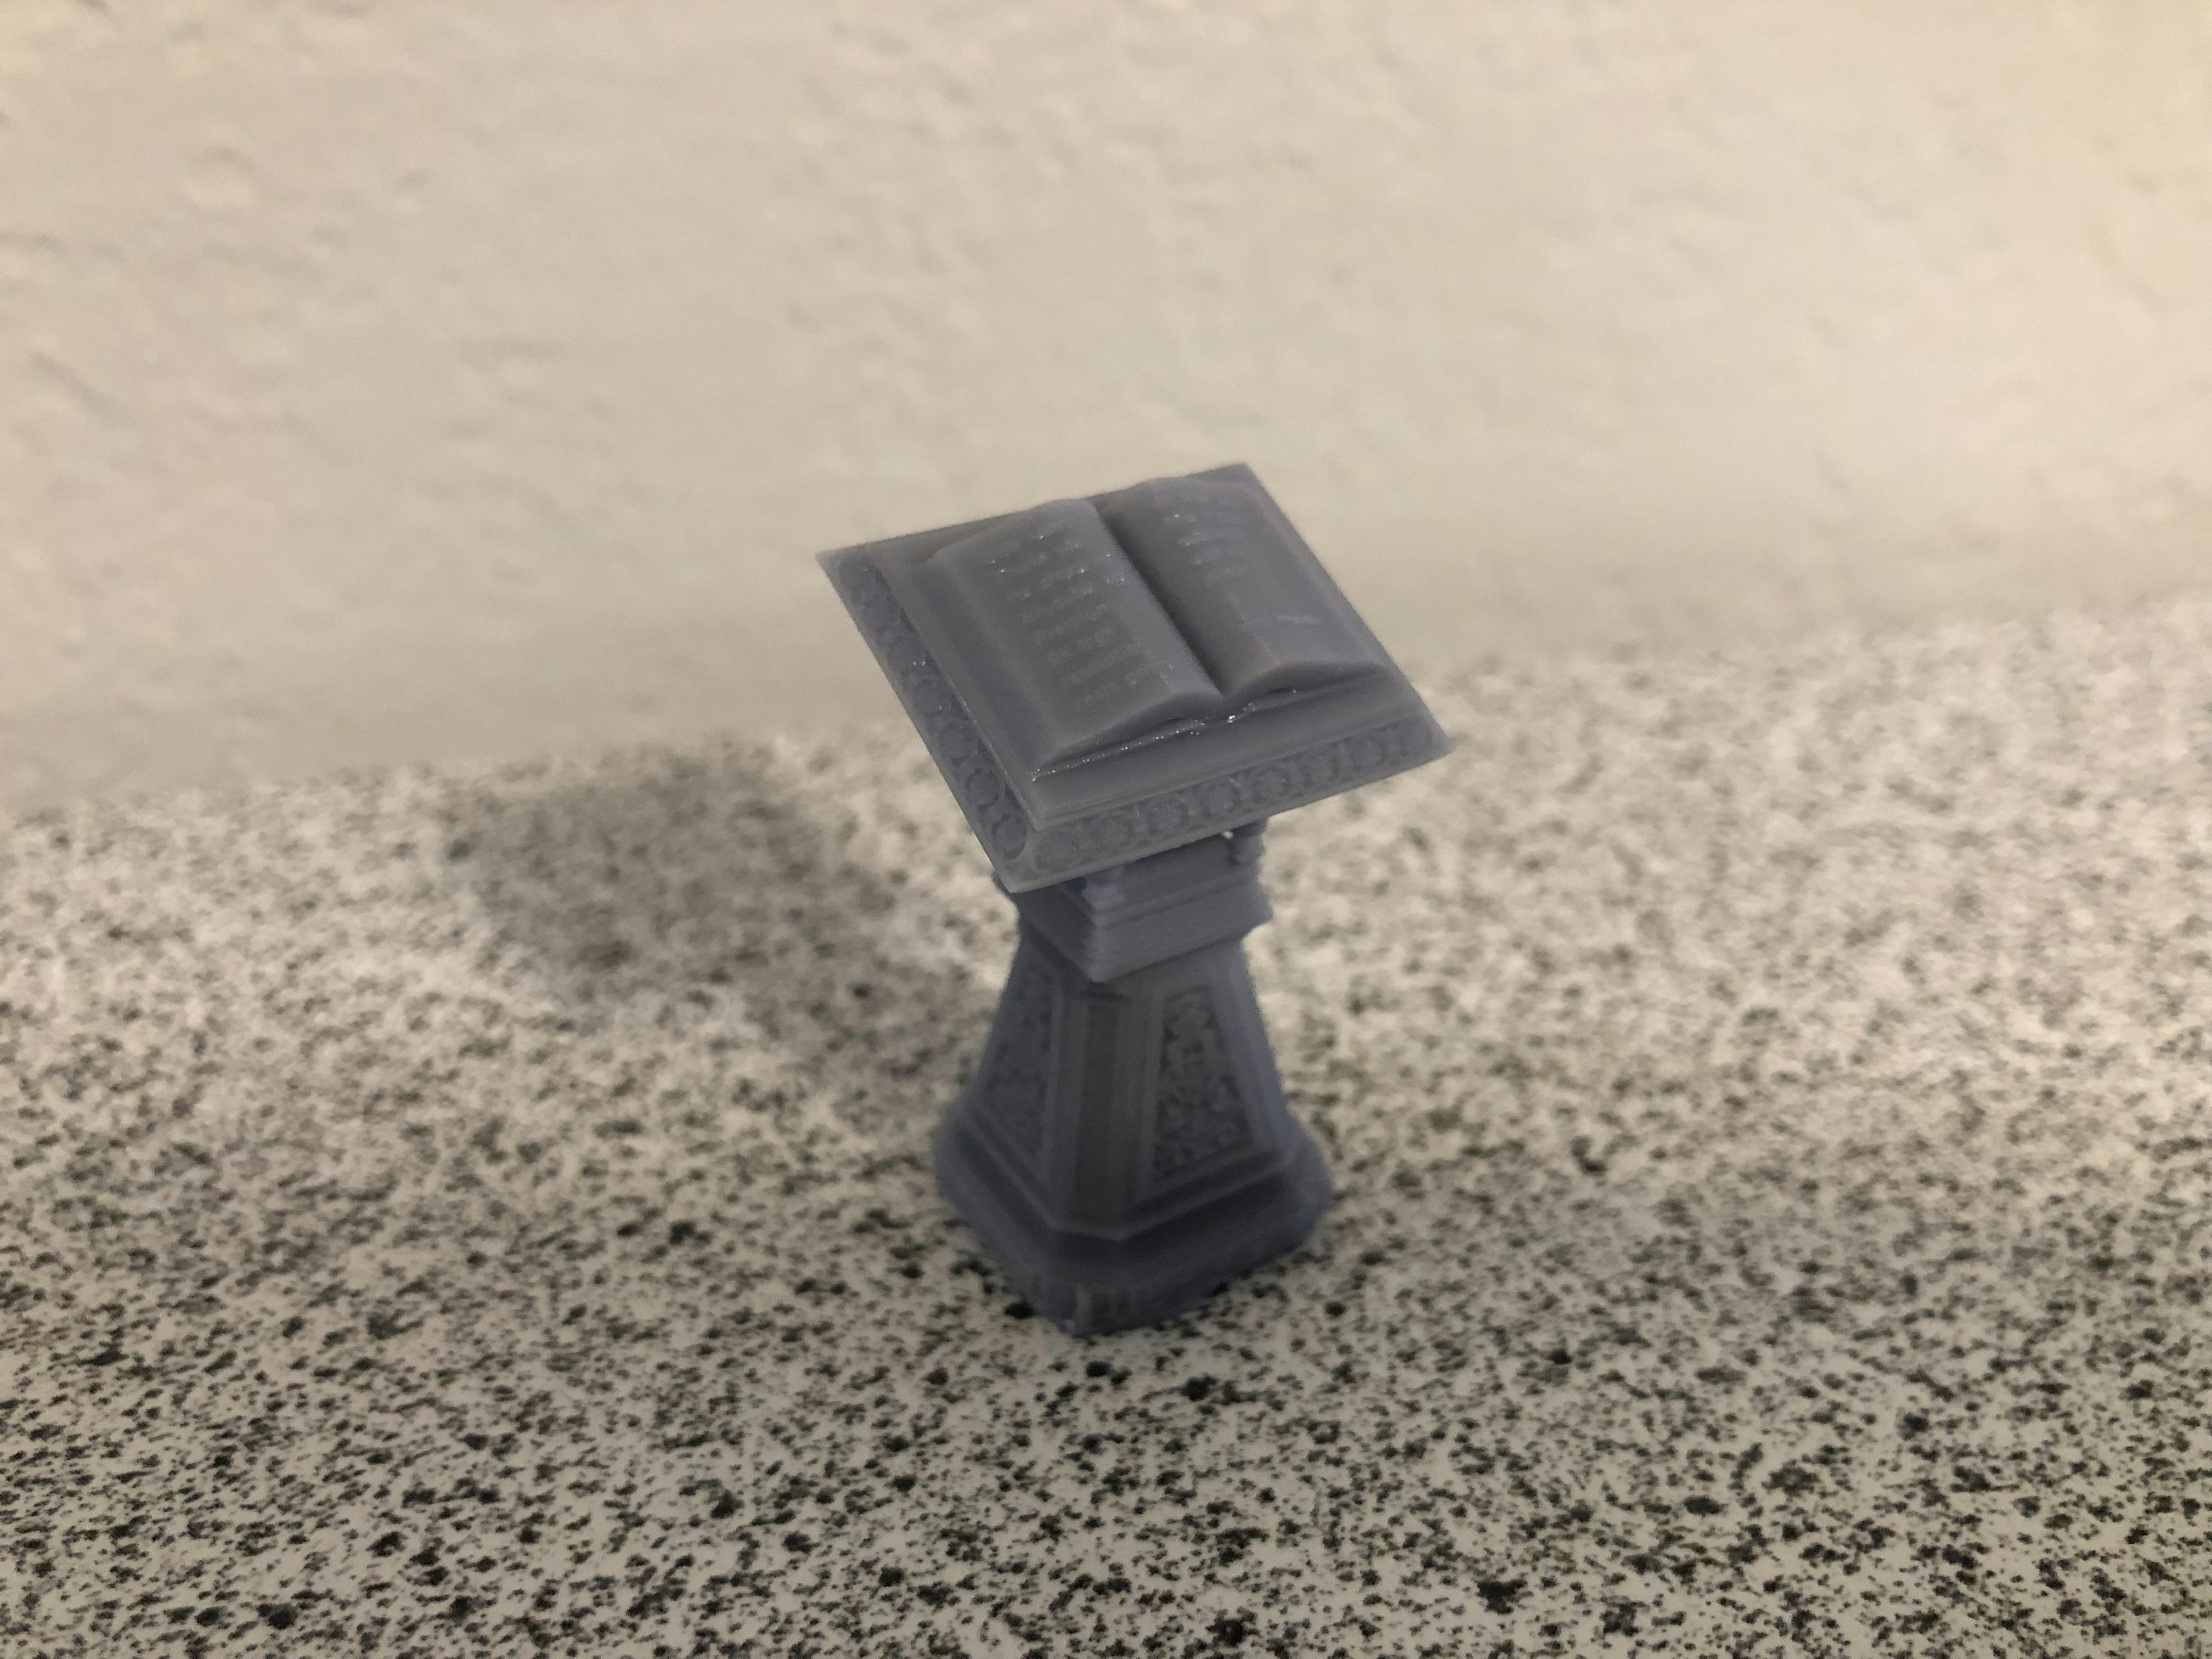 Anycubic Photon M3 Premium review: bigger and better